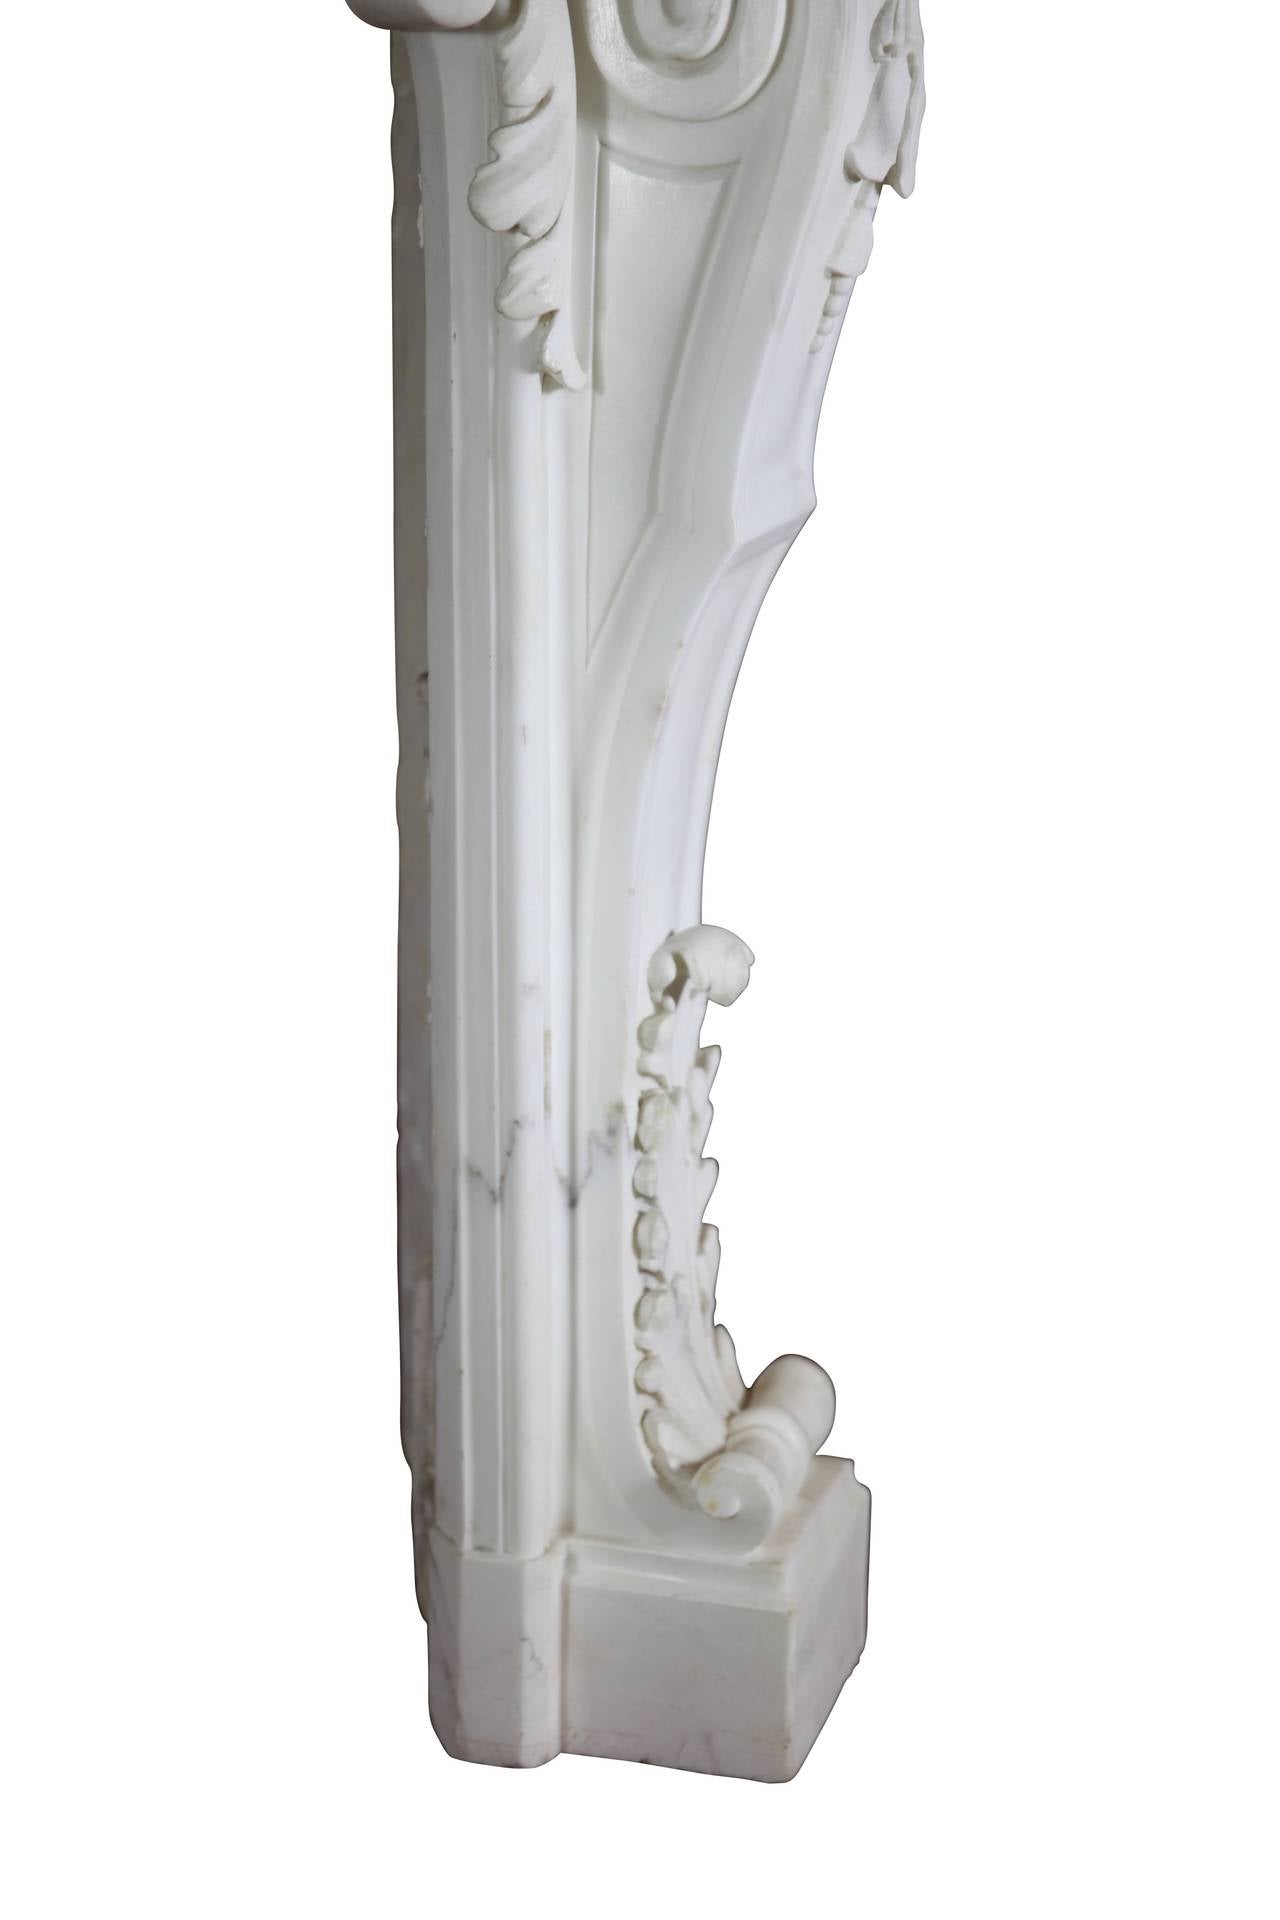 European Opulent White Statuary Marble Fireplace Surround For Sale 1